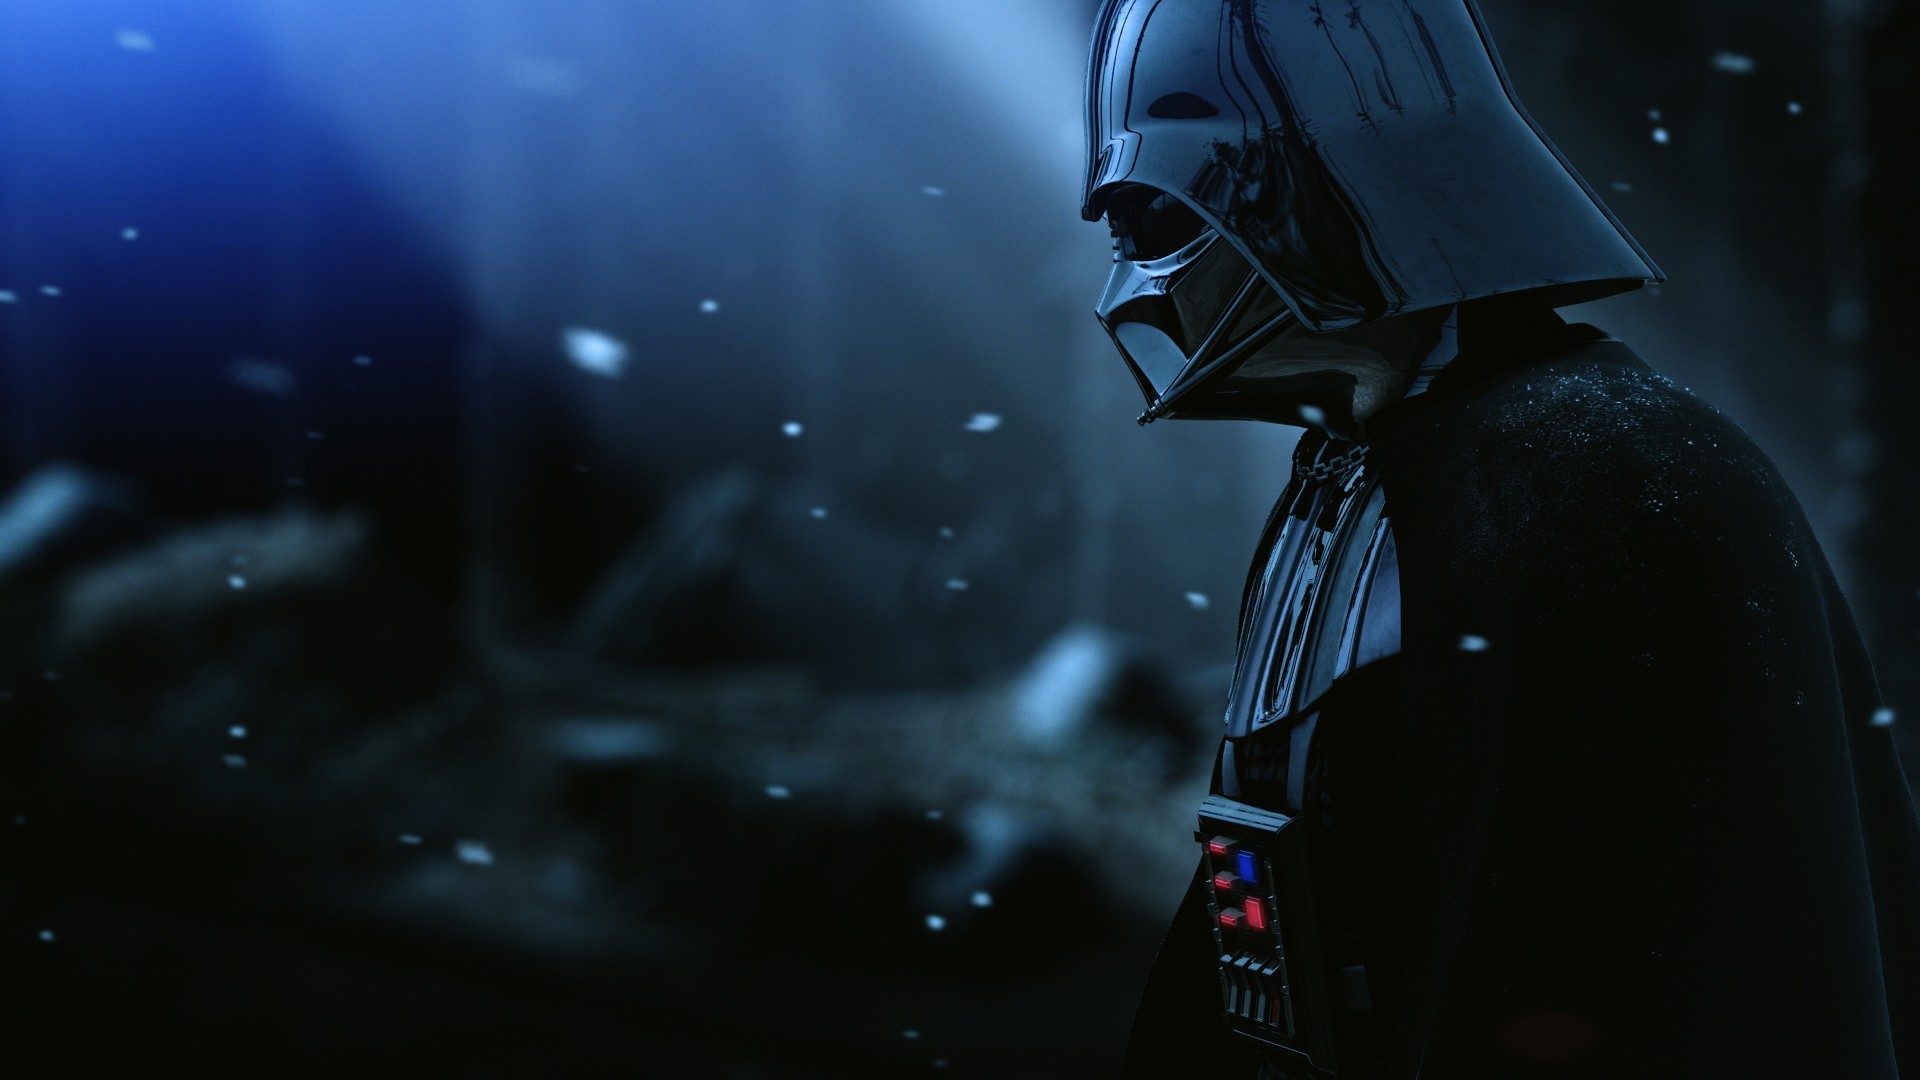 this star wars wallpaper pack contains 31 unique wallpapers in full hd 1920x1080